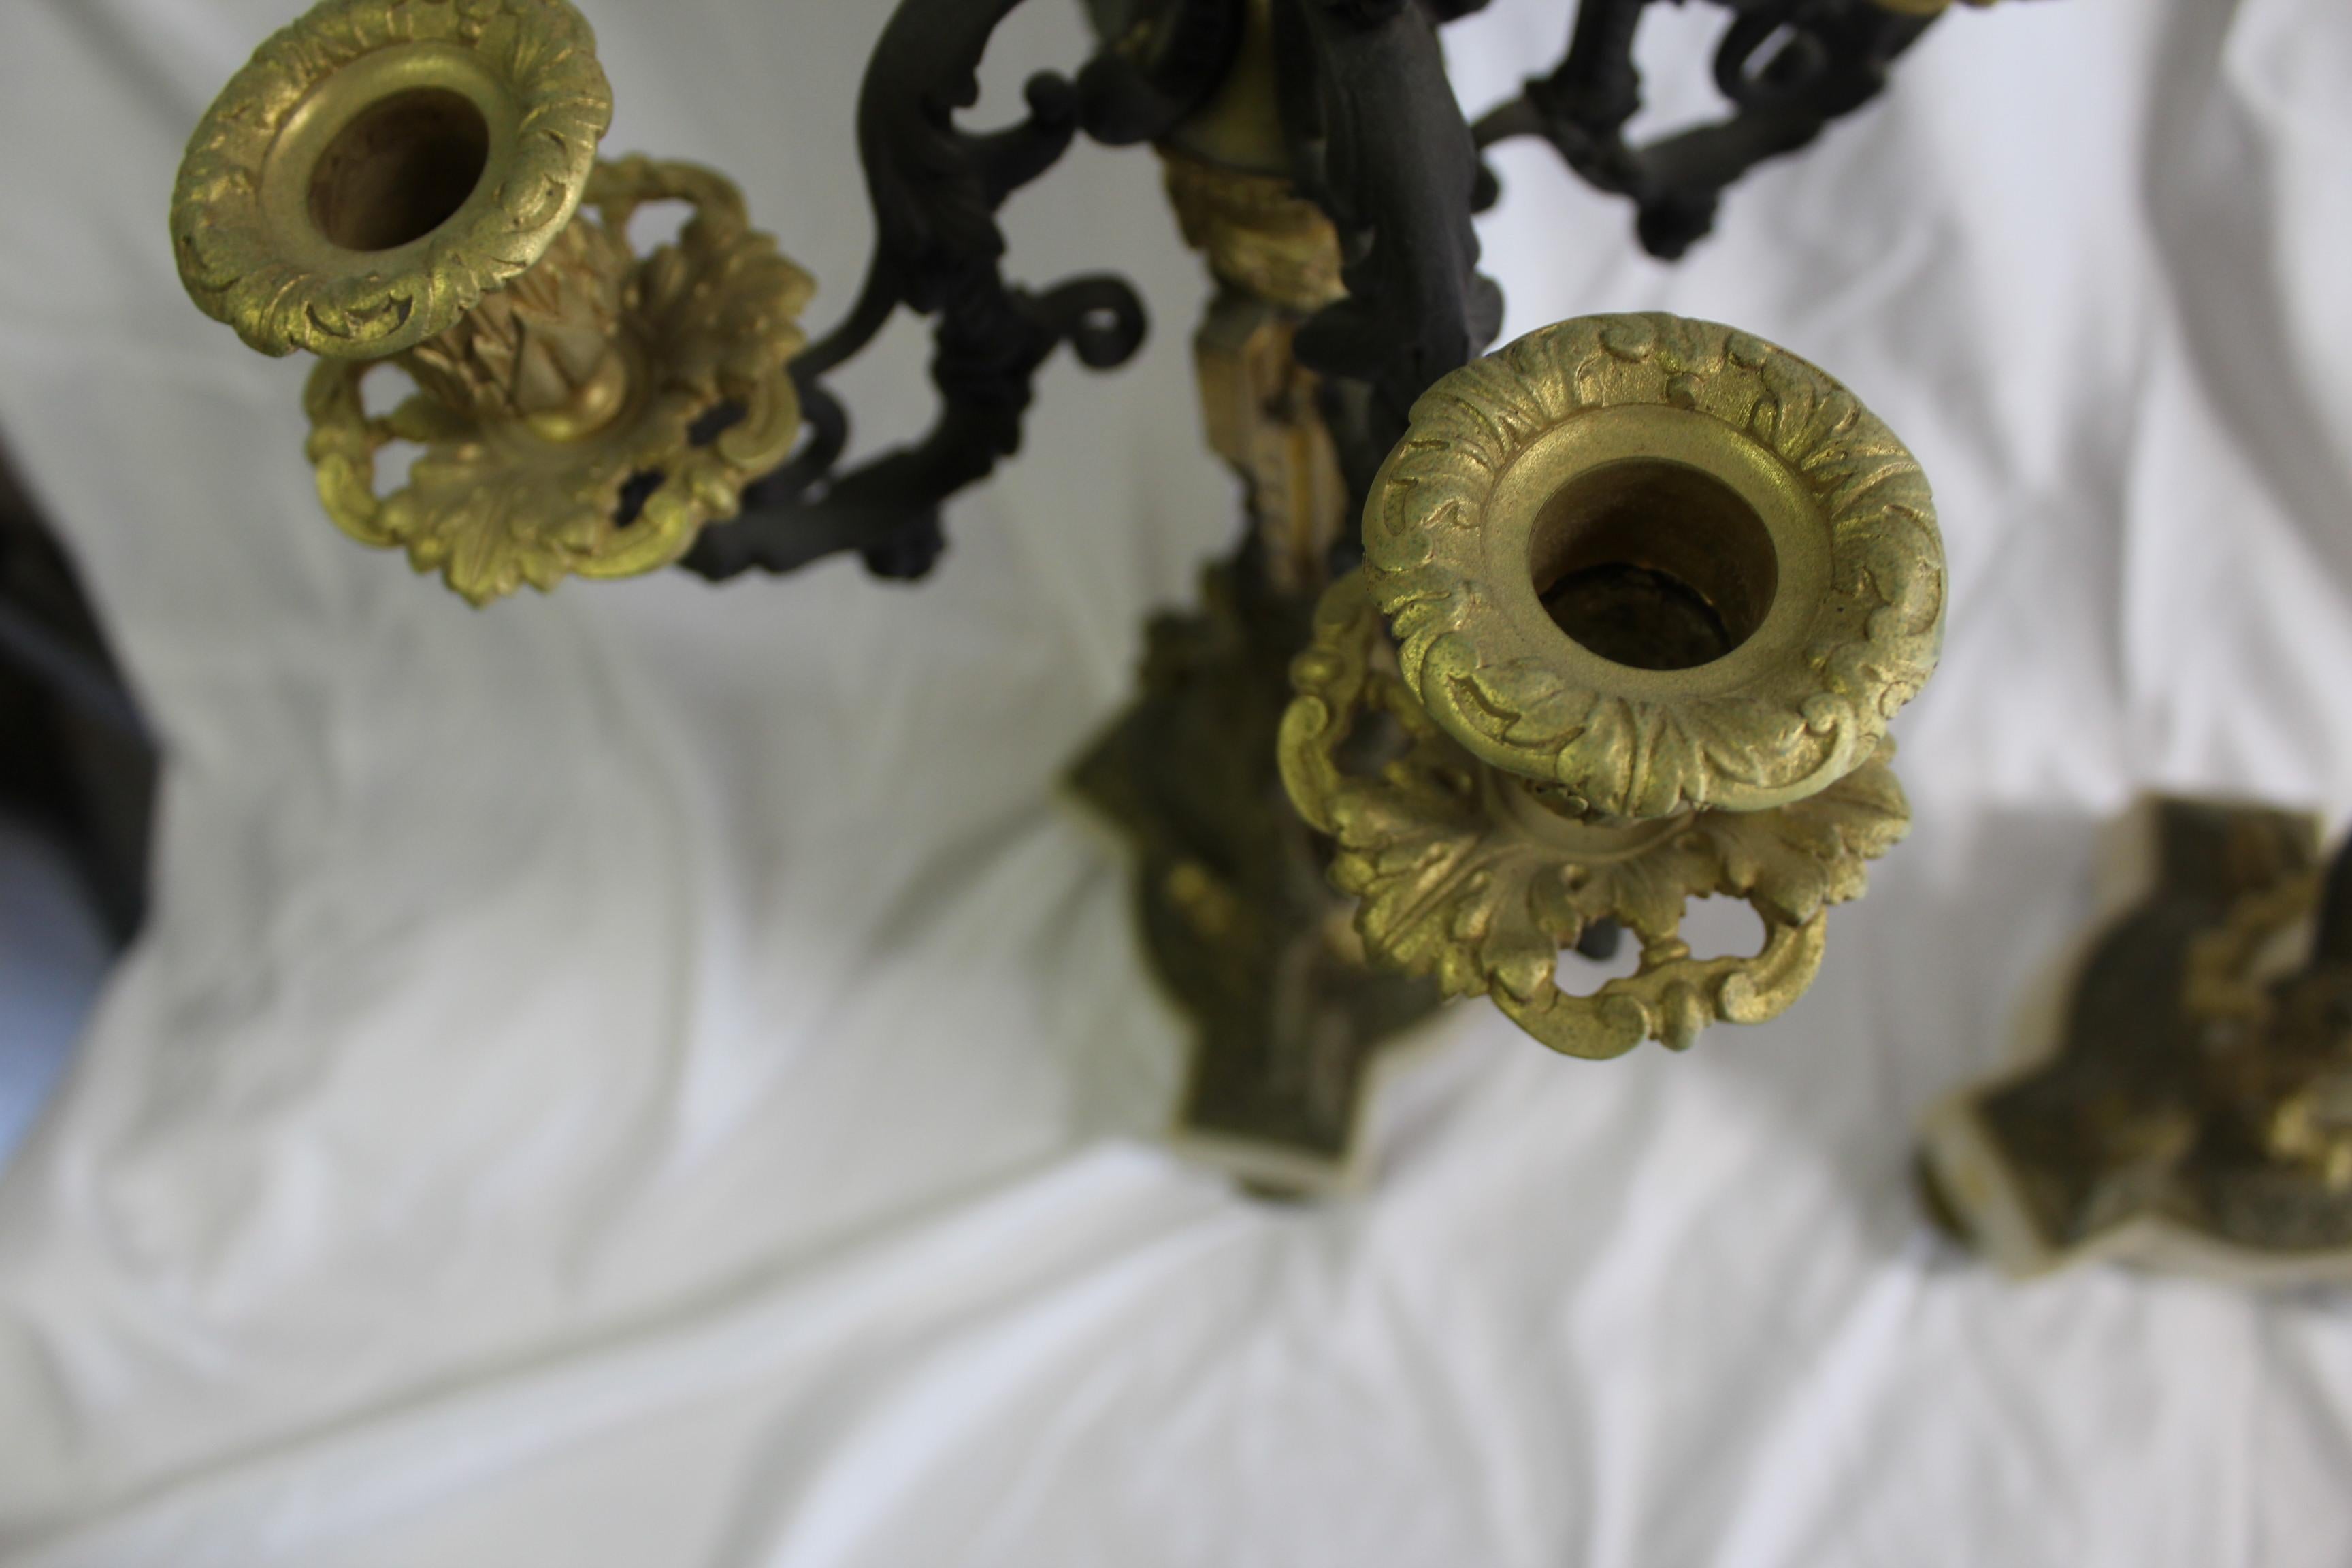 Cast Candelabras, Antique Pair w/Dore' Gold Finish, 5 Arms For Sale